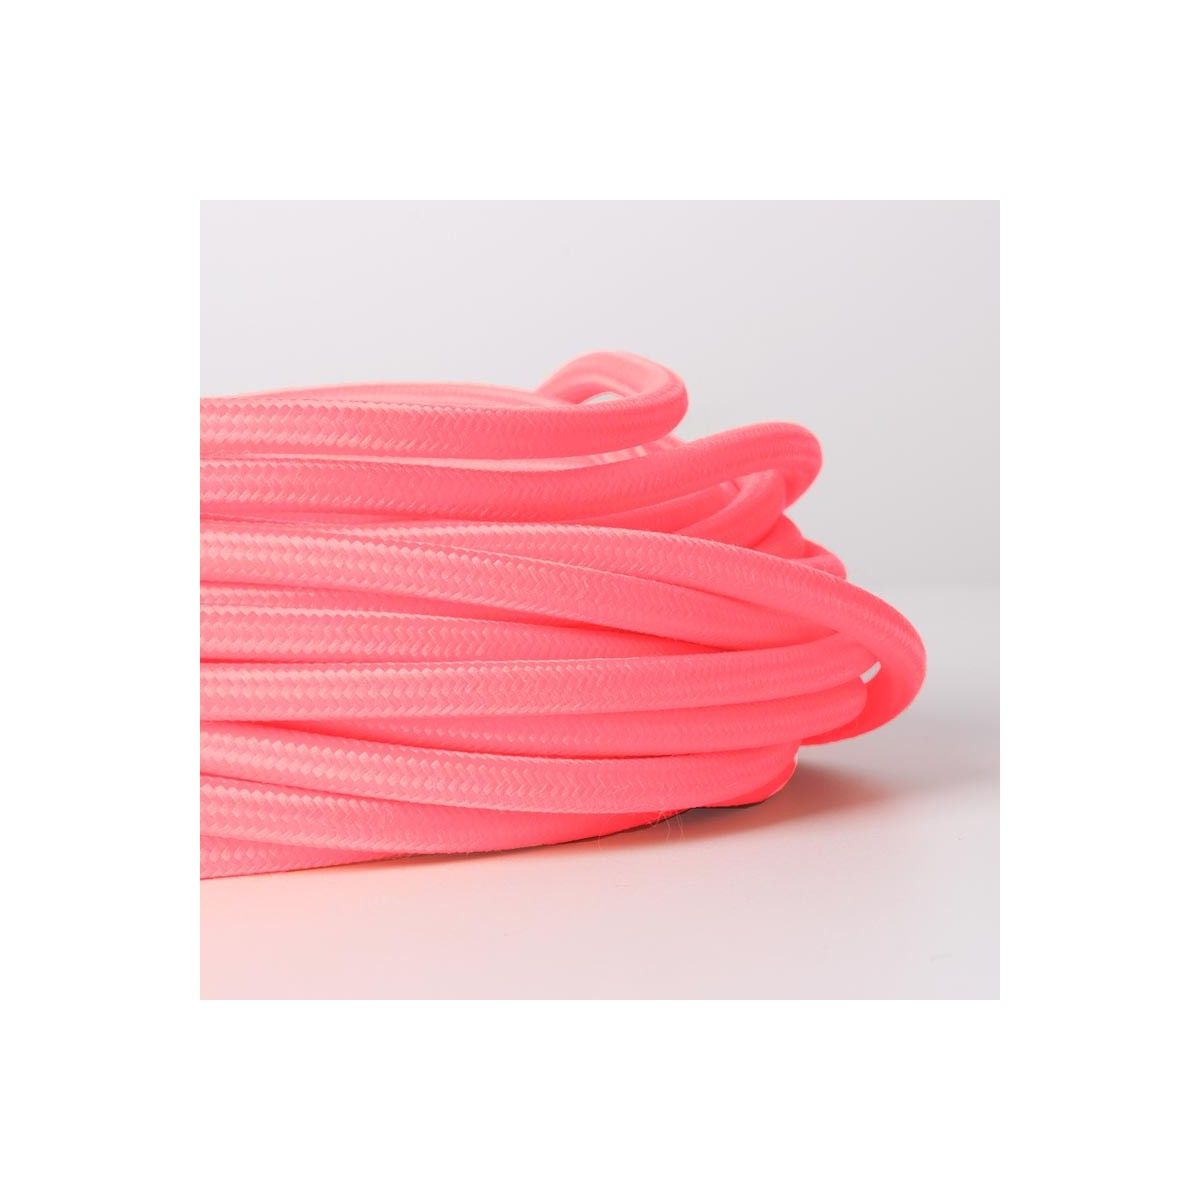 Citrus Coral cotton coated round electric cable